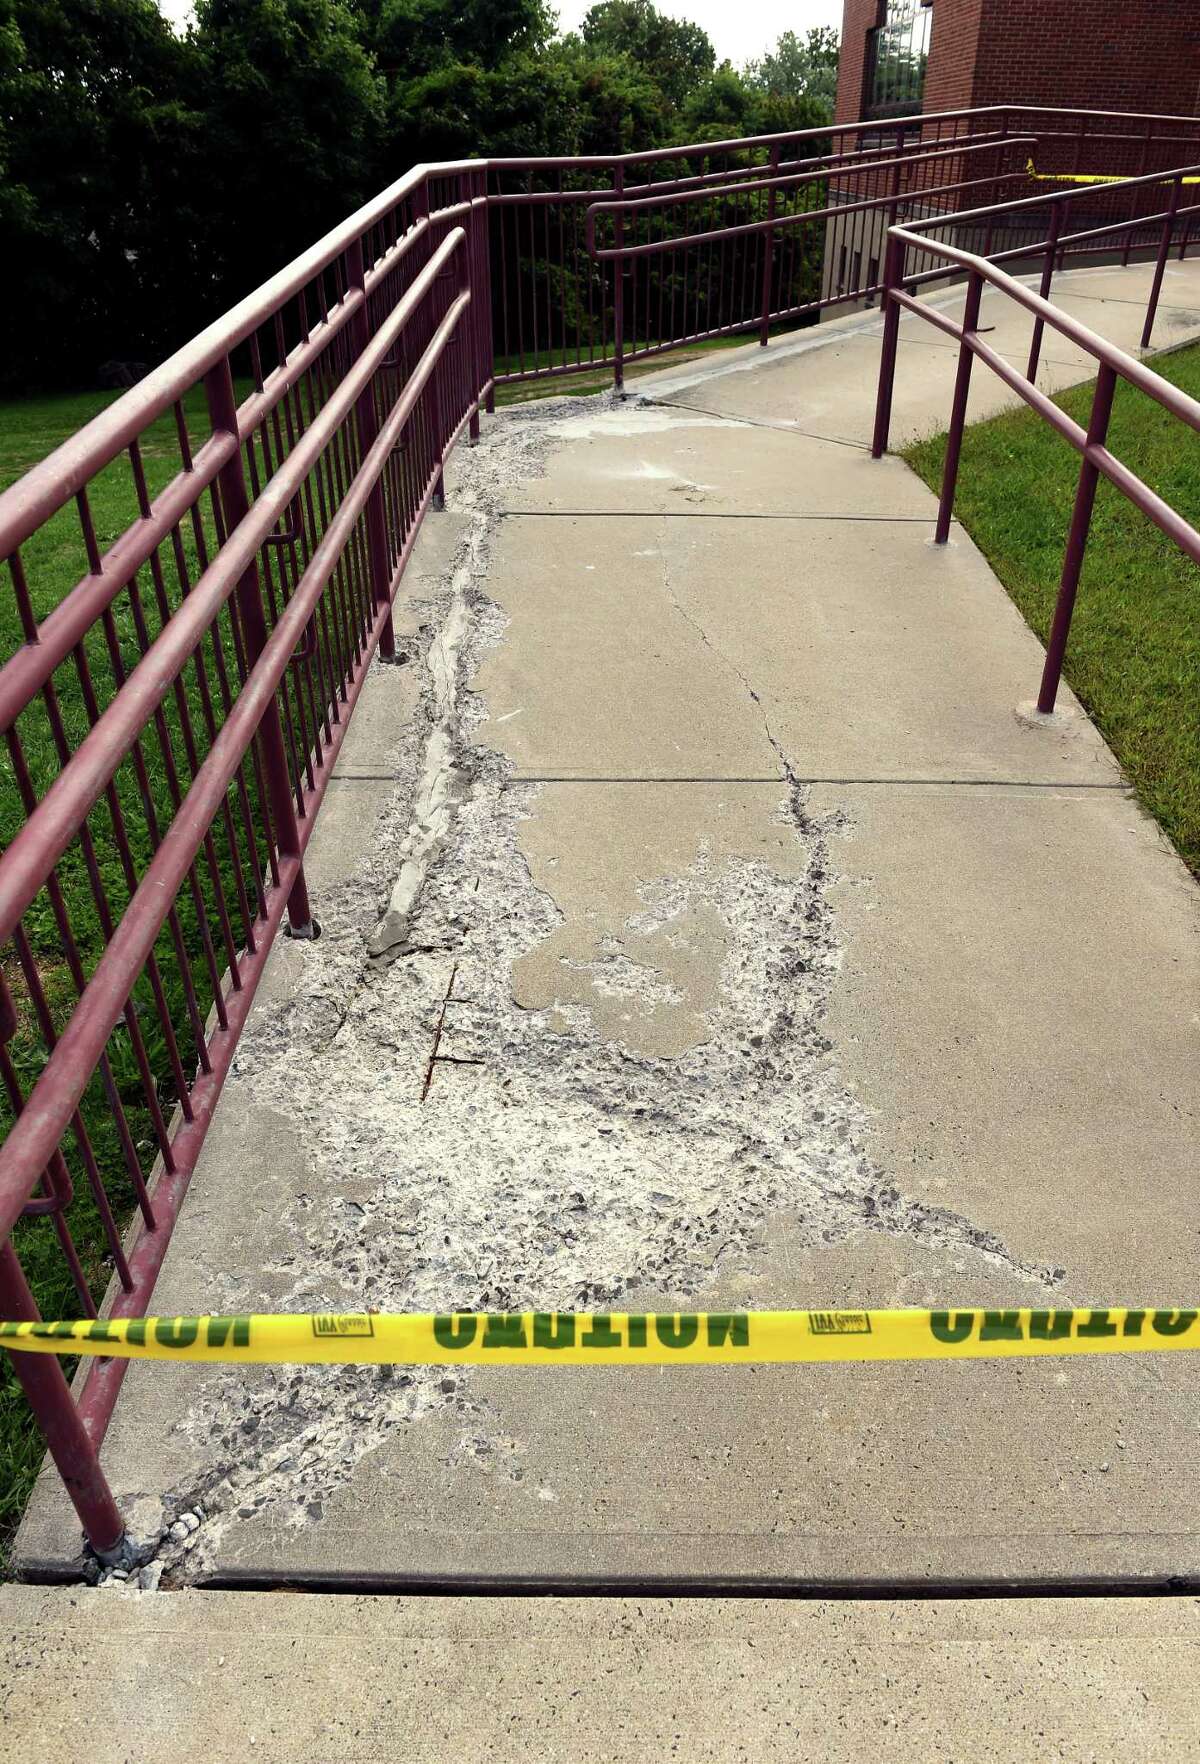 A cracked entrance ramp at Seth Haley Elementary School in West Haven photographed on September 15, 2022.